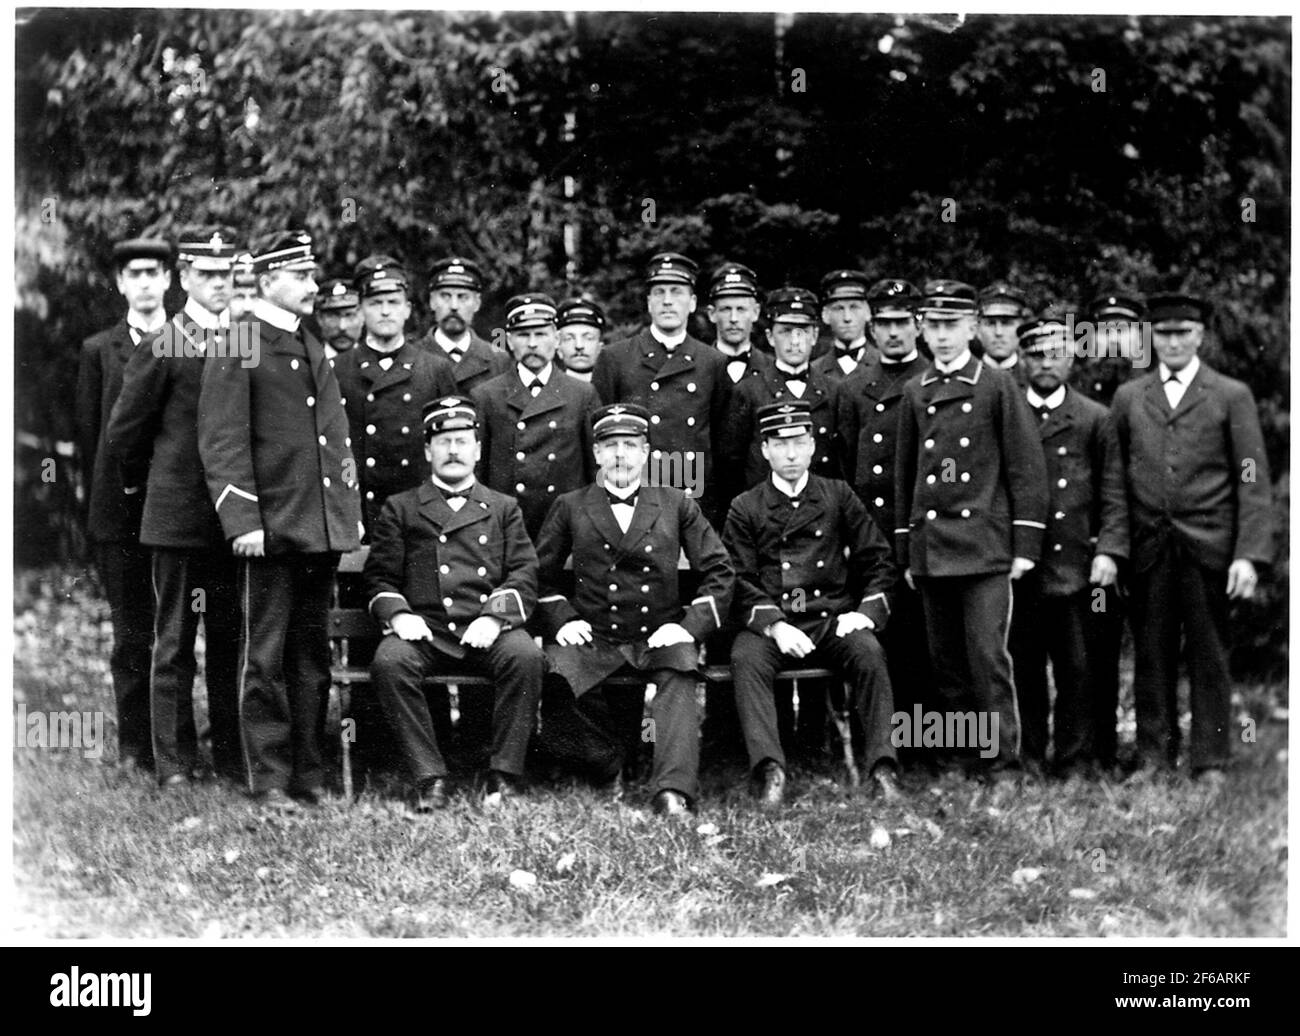 Ove Gedda, station inspector with staff at Kilafors station. Stock Photo